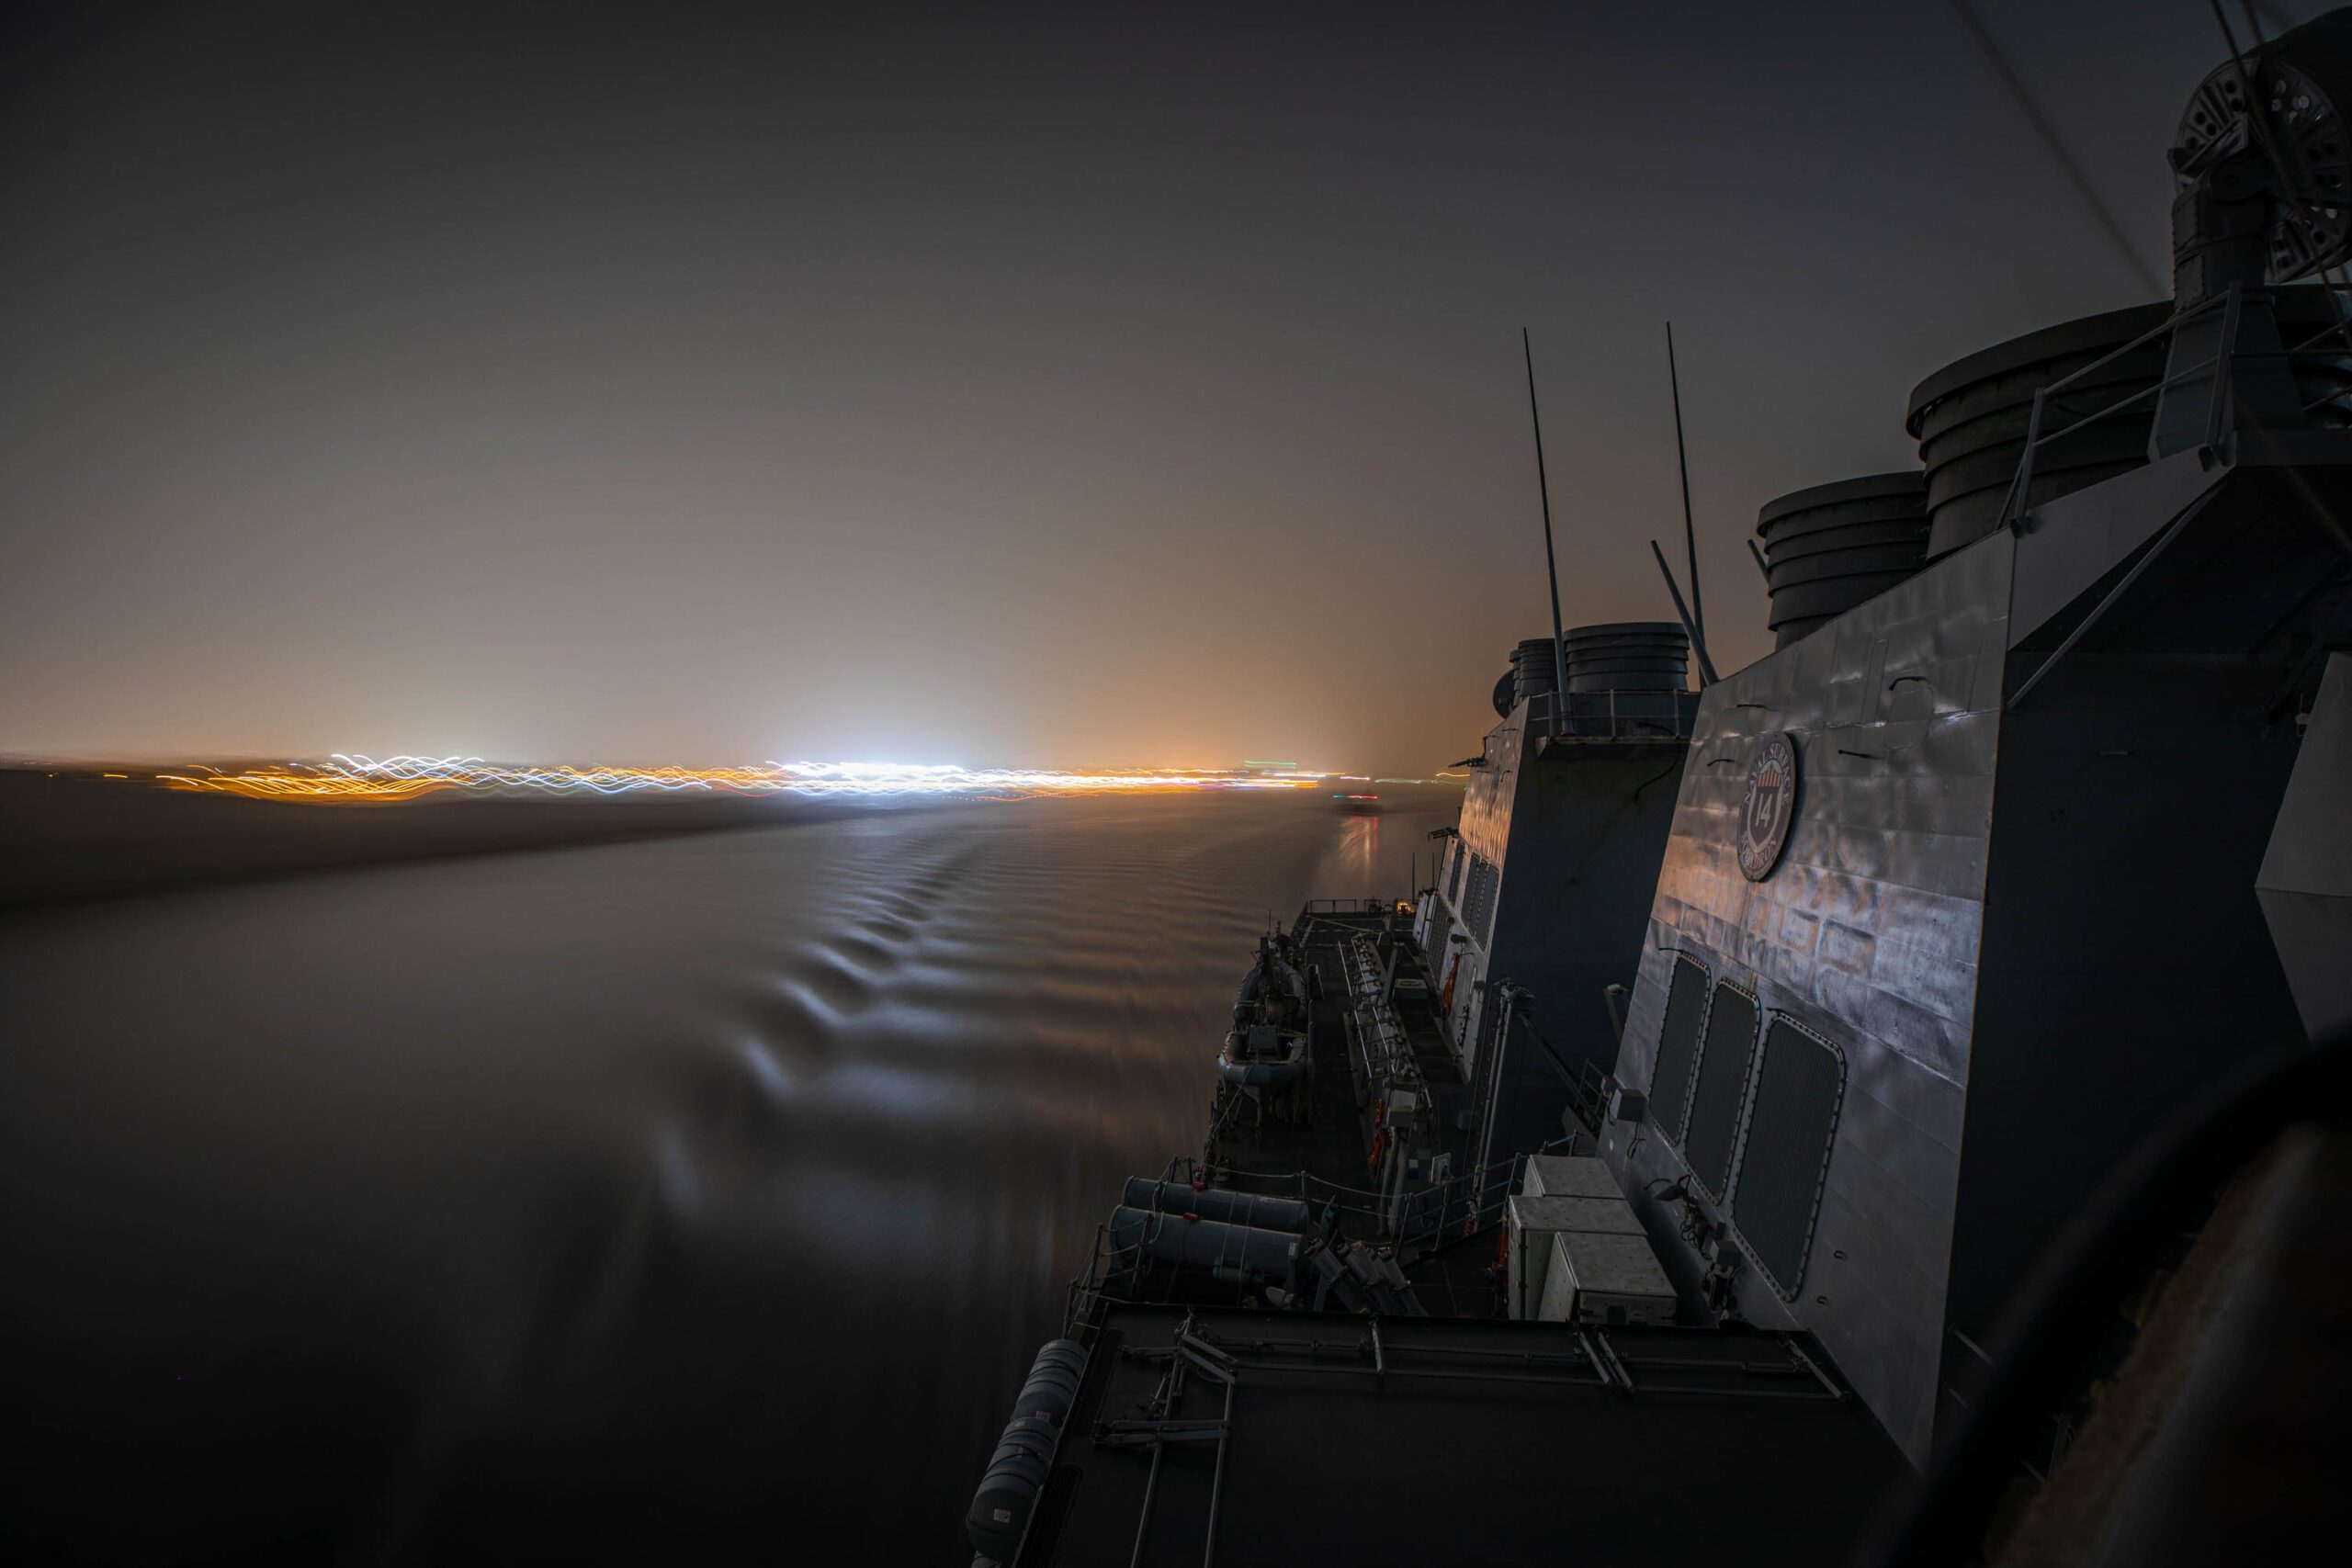 USS Carney underway at night in the suez canal